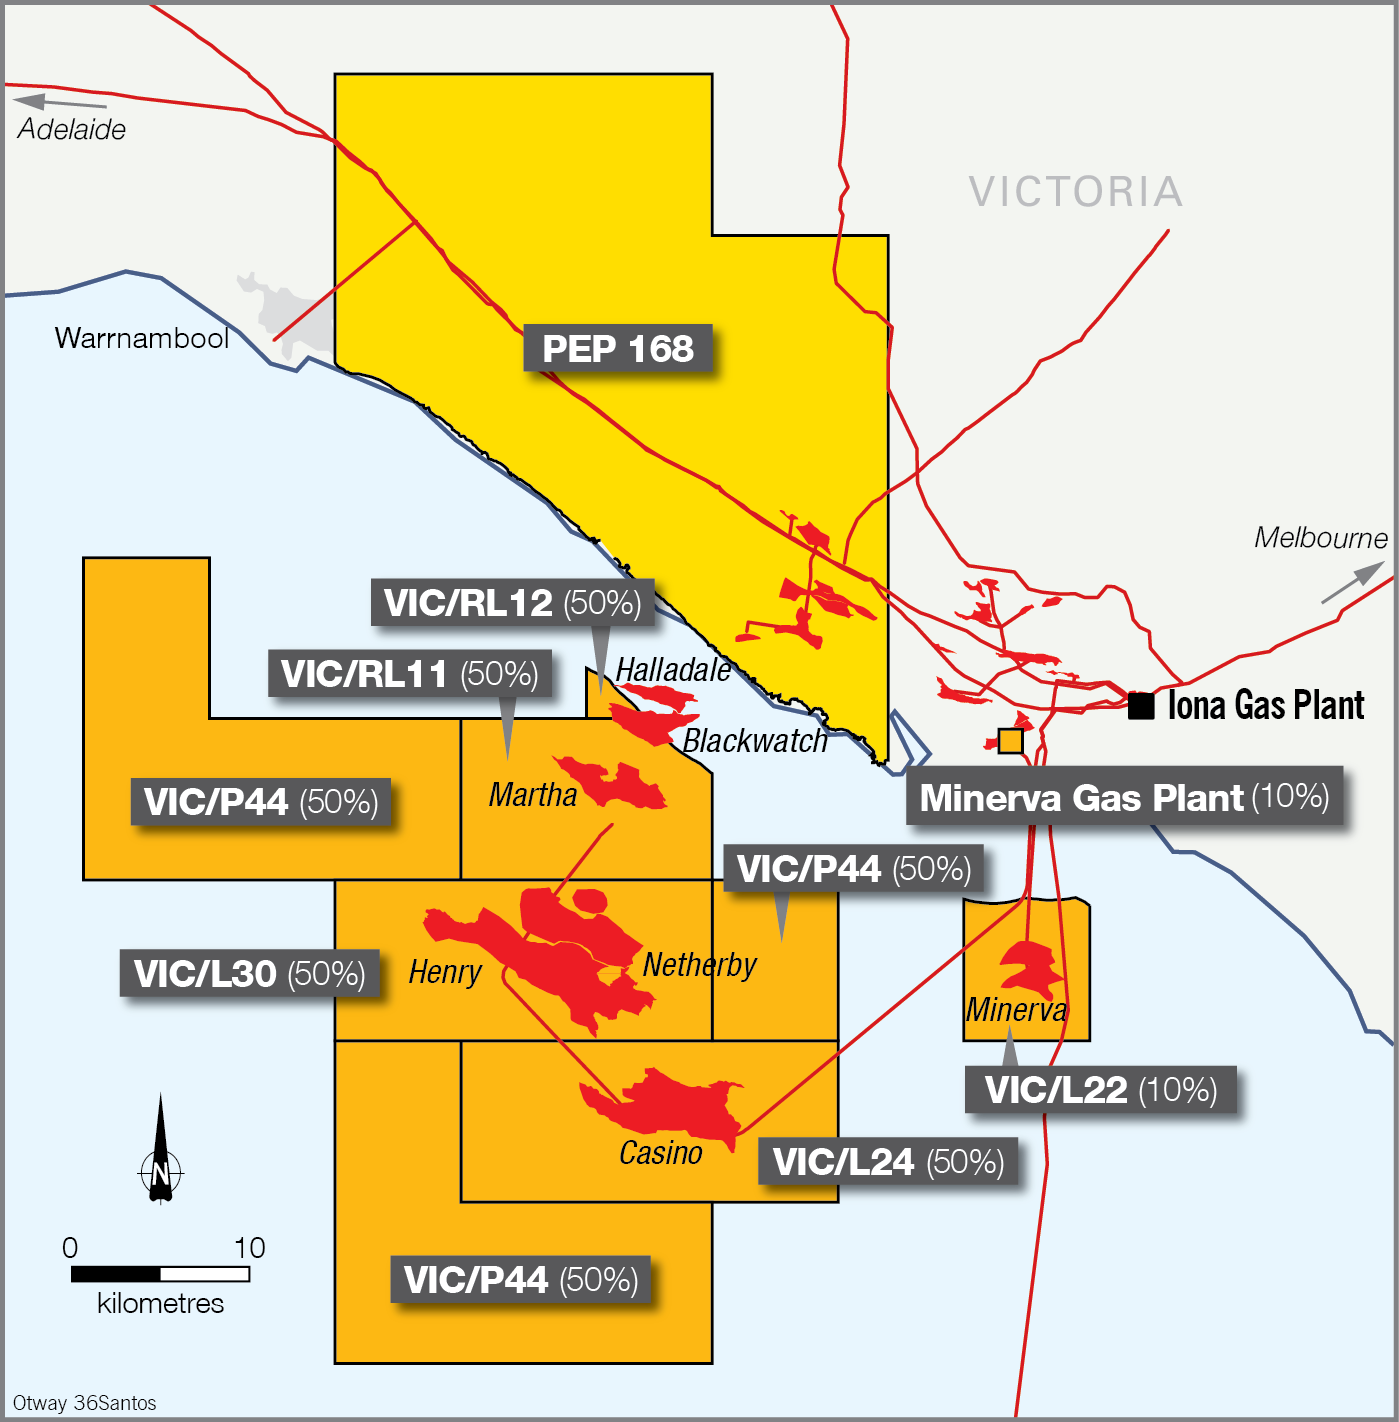 Location map - Activity: Casino, Netherby & Henry - Licence Areas VIC/L24 and VIC/L30 (inc offshore licensed pipelines VIC/PL37, VIC/PL37(V) and VIC/PL42) Environment Plan - Operations (refer to description)